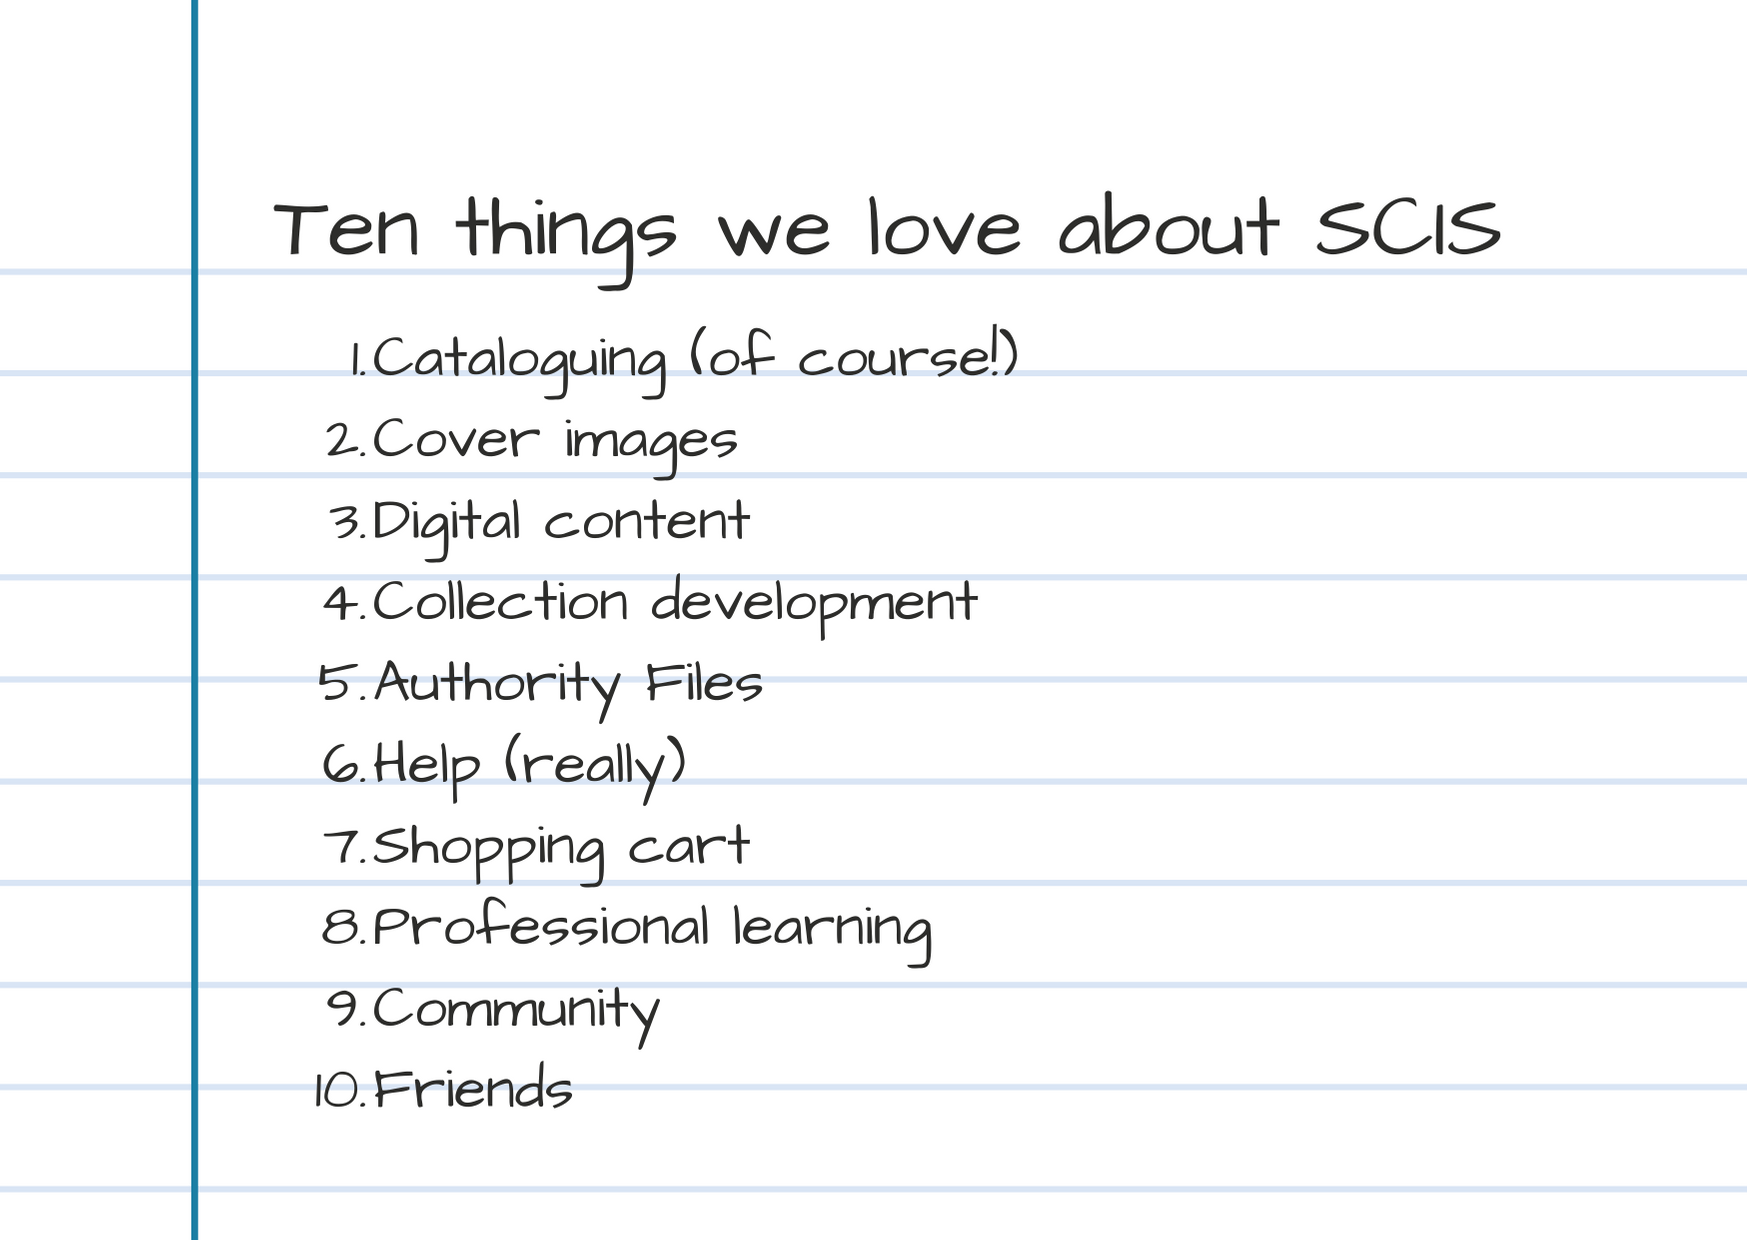 List: Ten things we love about SCIS